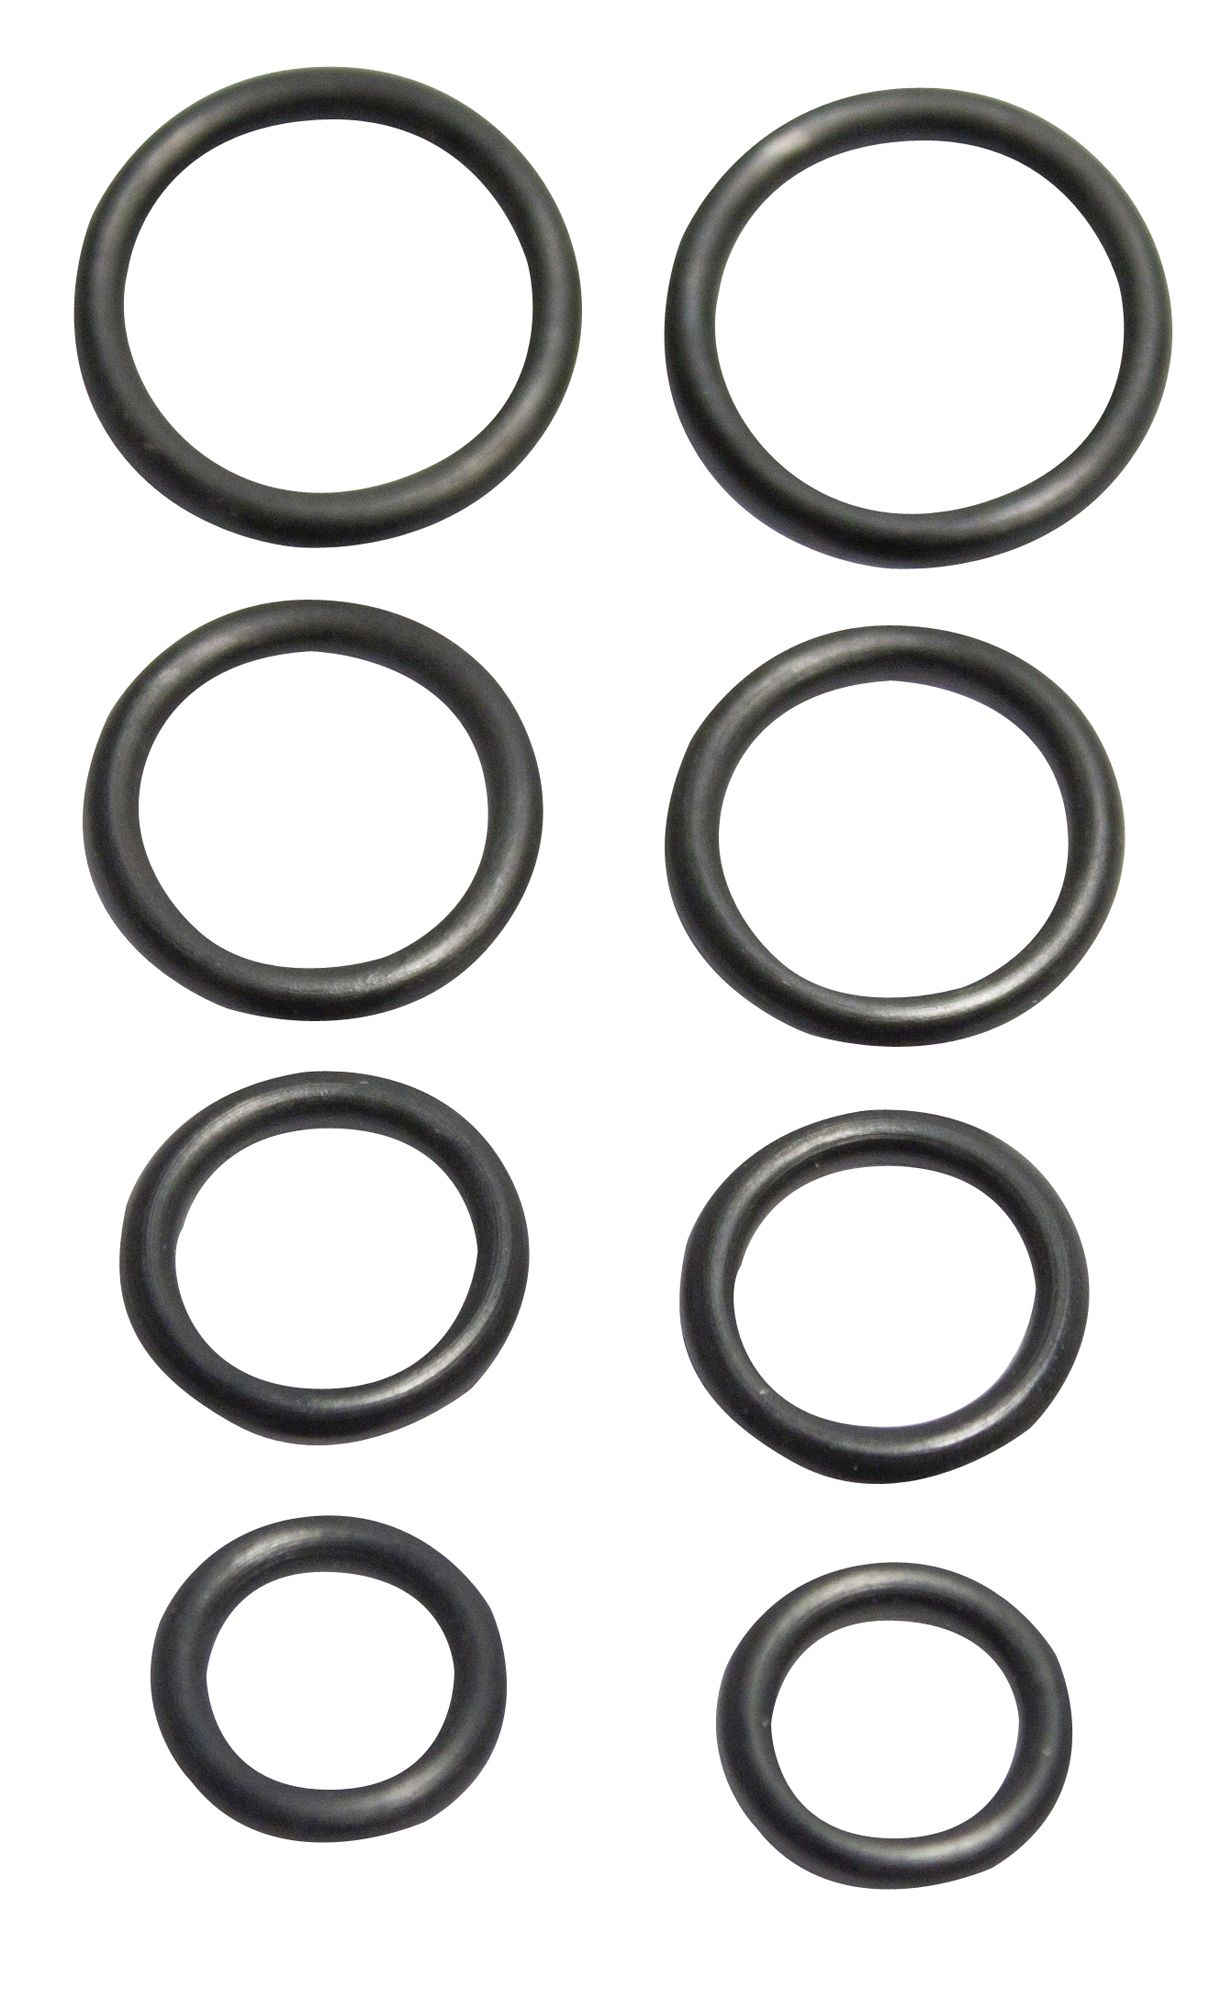 Plumbsure Rubber O ring, Pack of 6